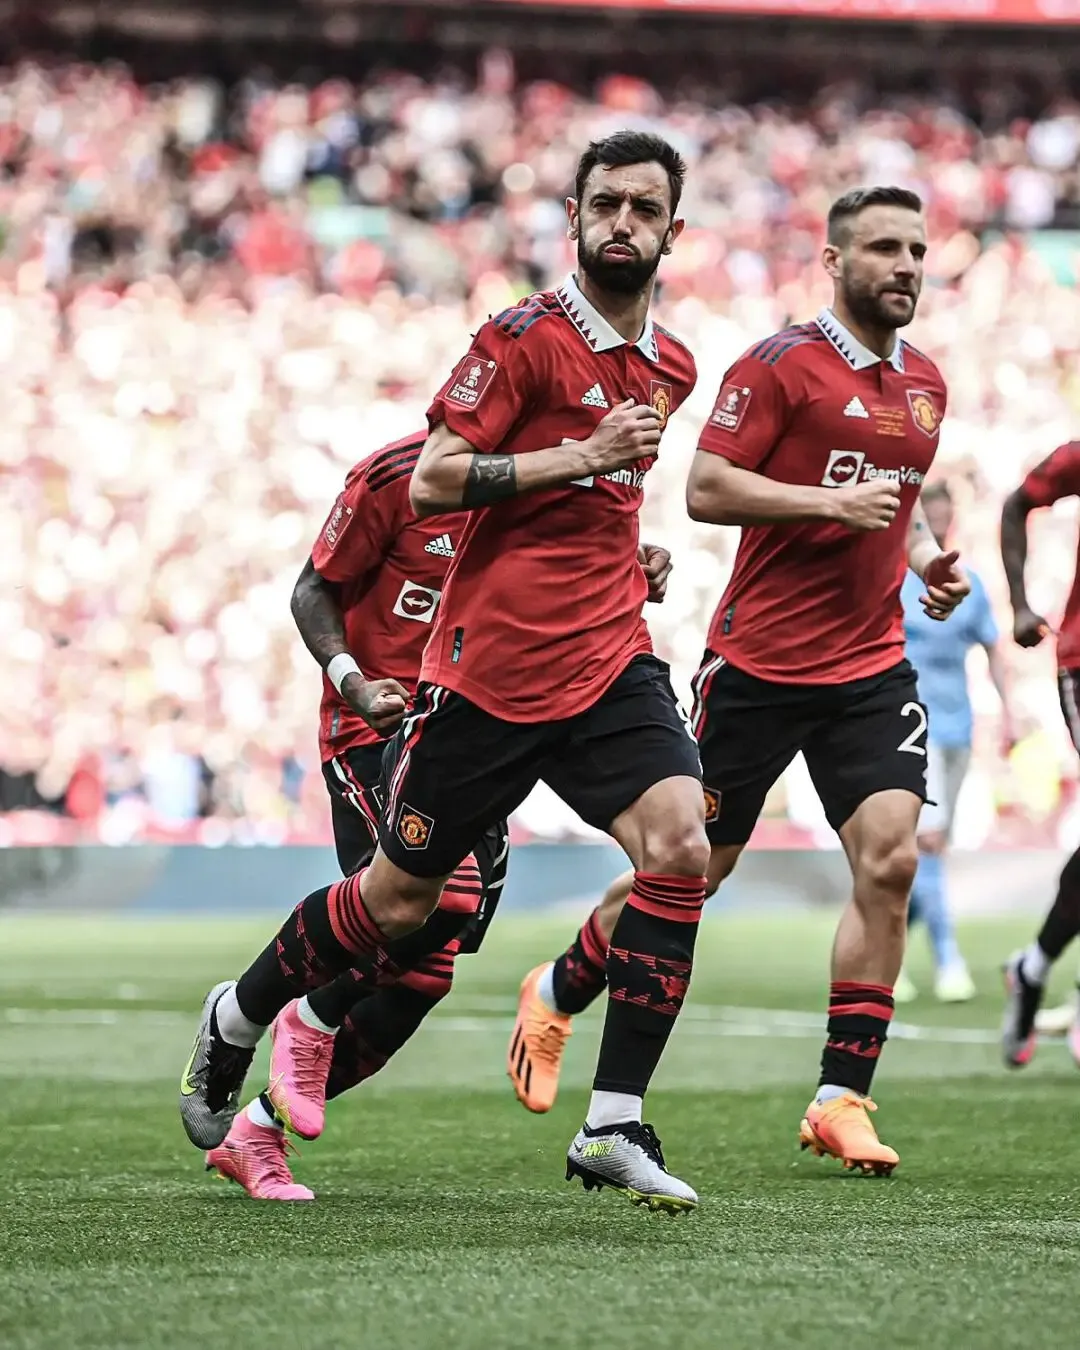 FA Cup Final: Bruno made no mistake and scored the much-needed equalizer | Sportz Point